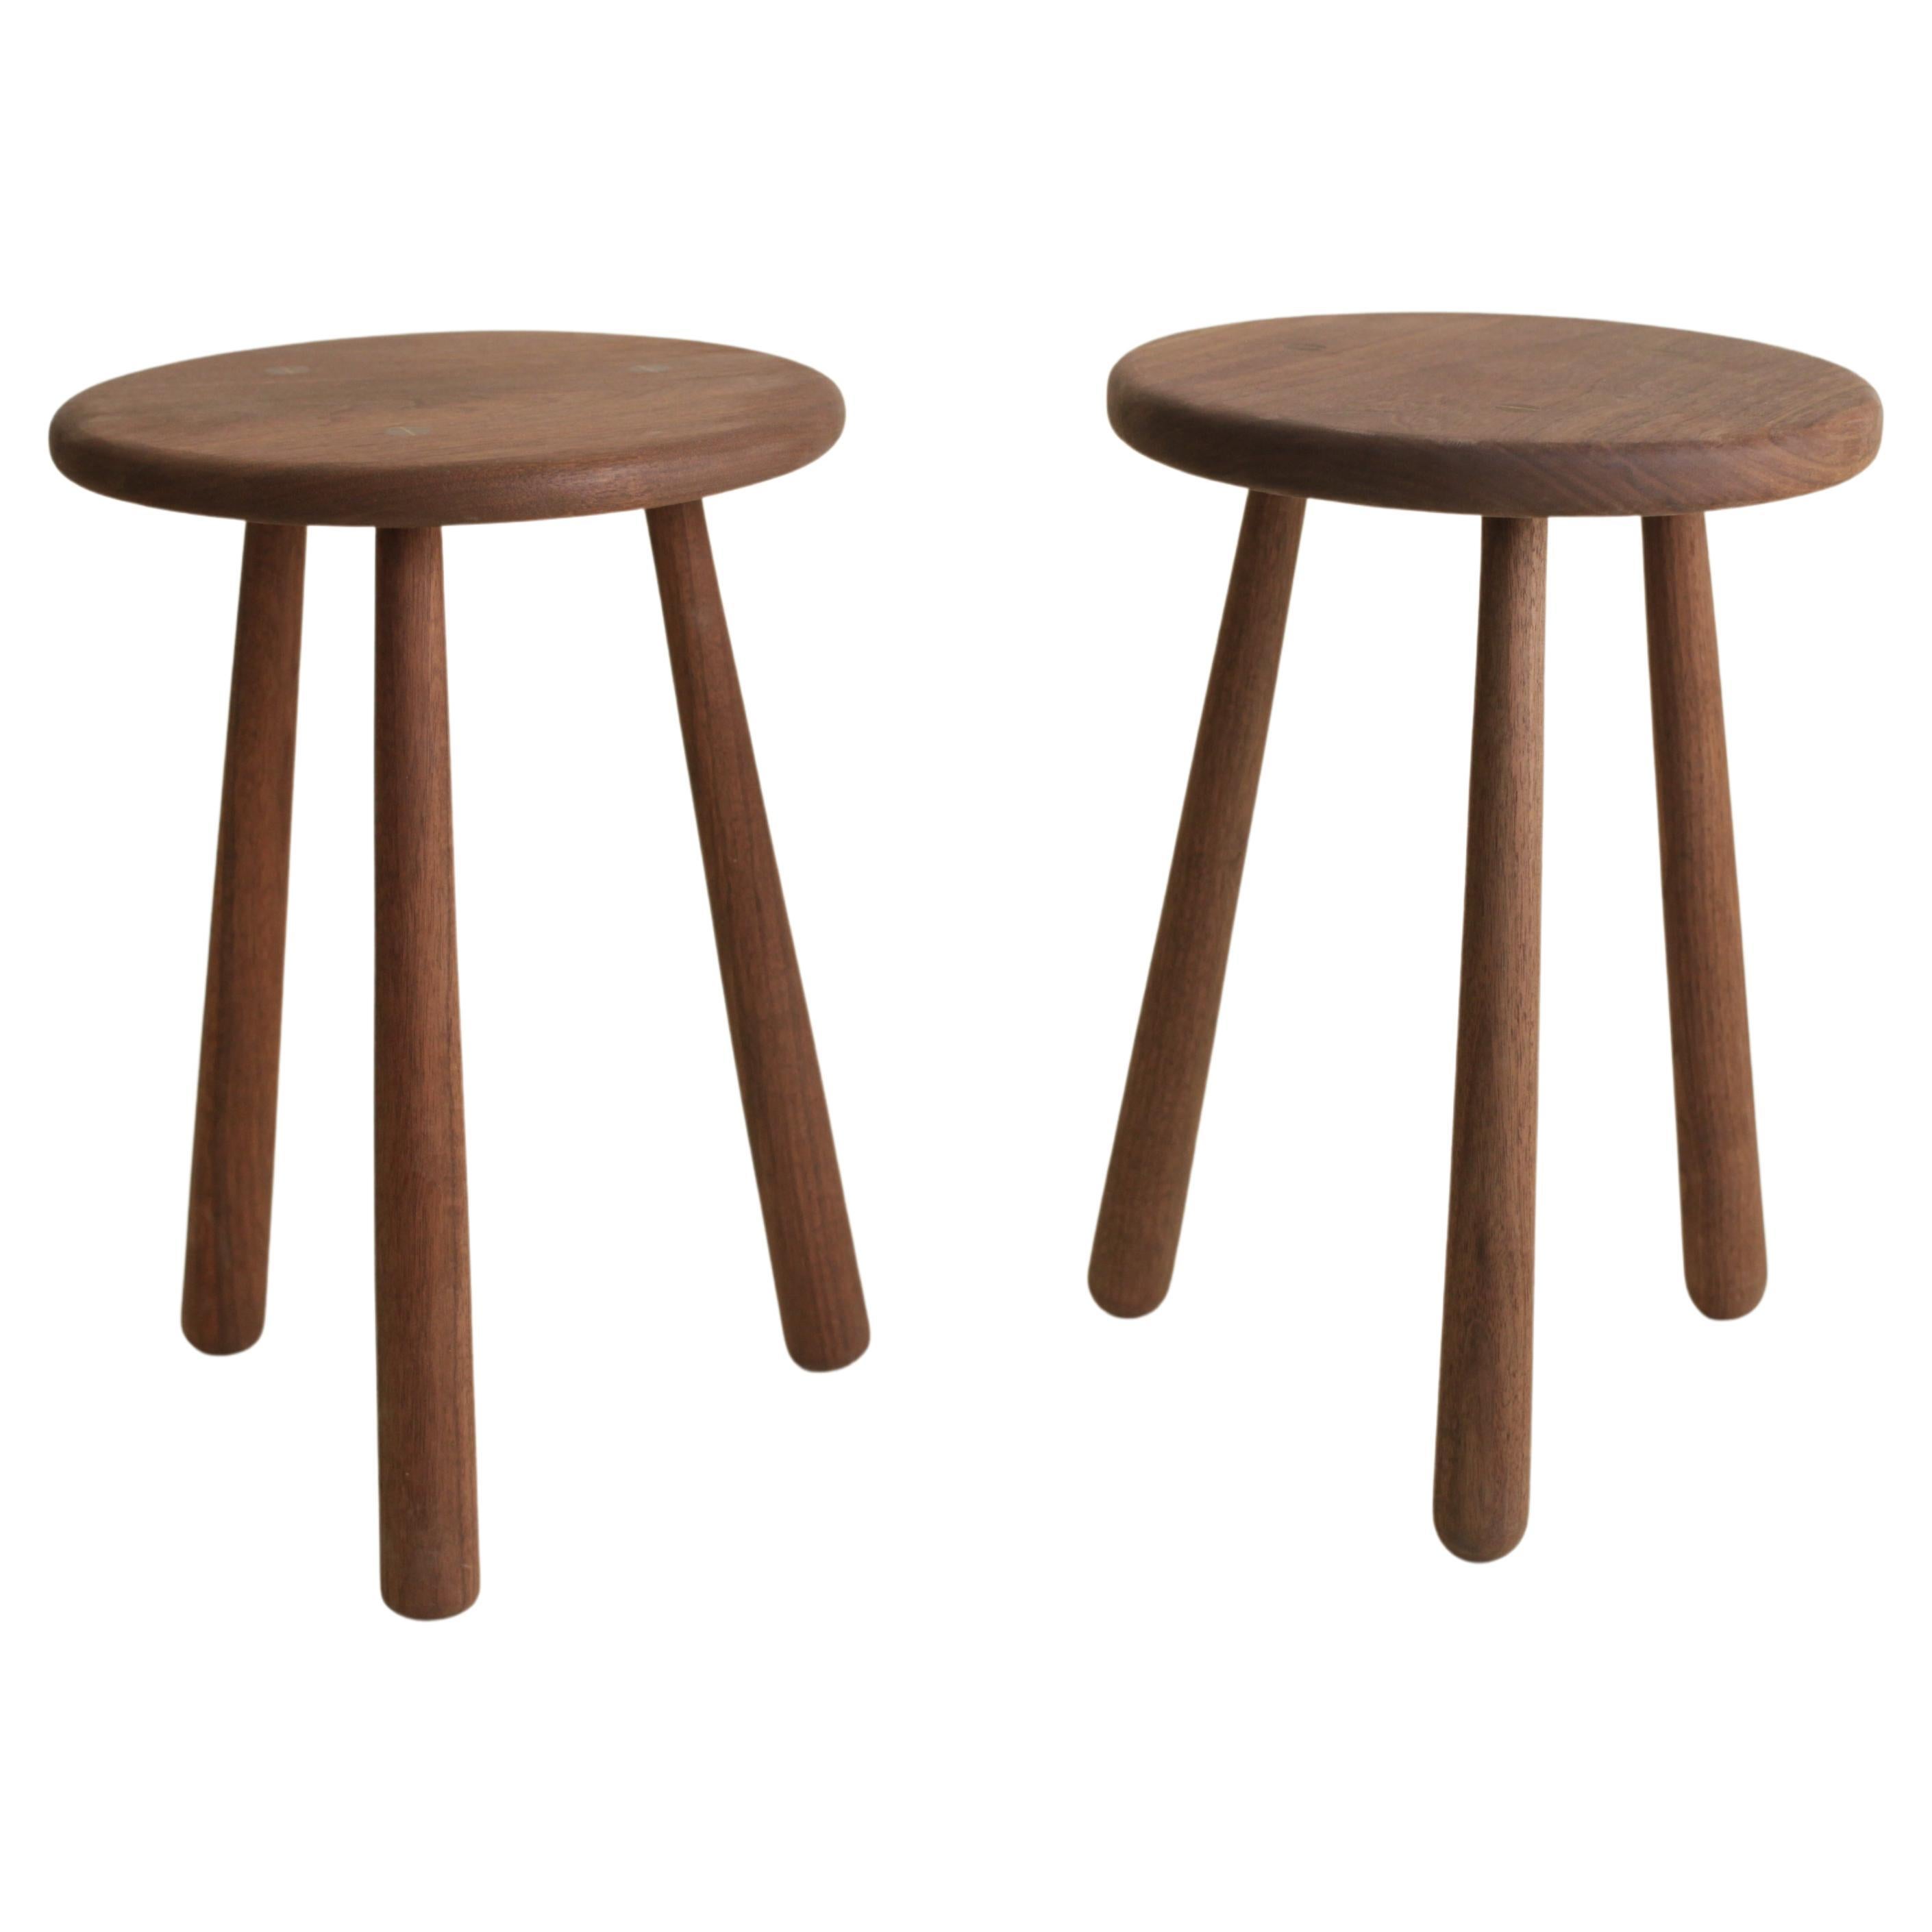 Oiled Tripod Stool in Solid Hardwoods with Wedged Through Tenons by Boyd & Allister For Sale